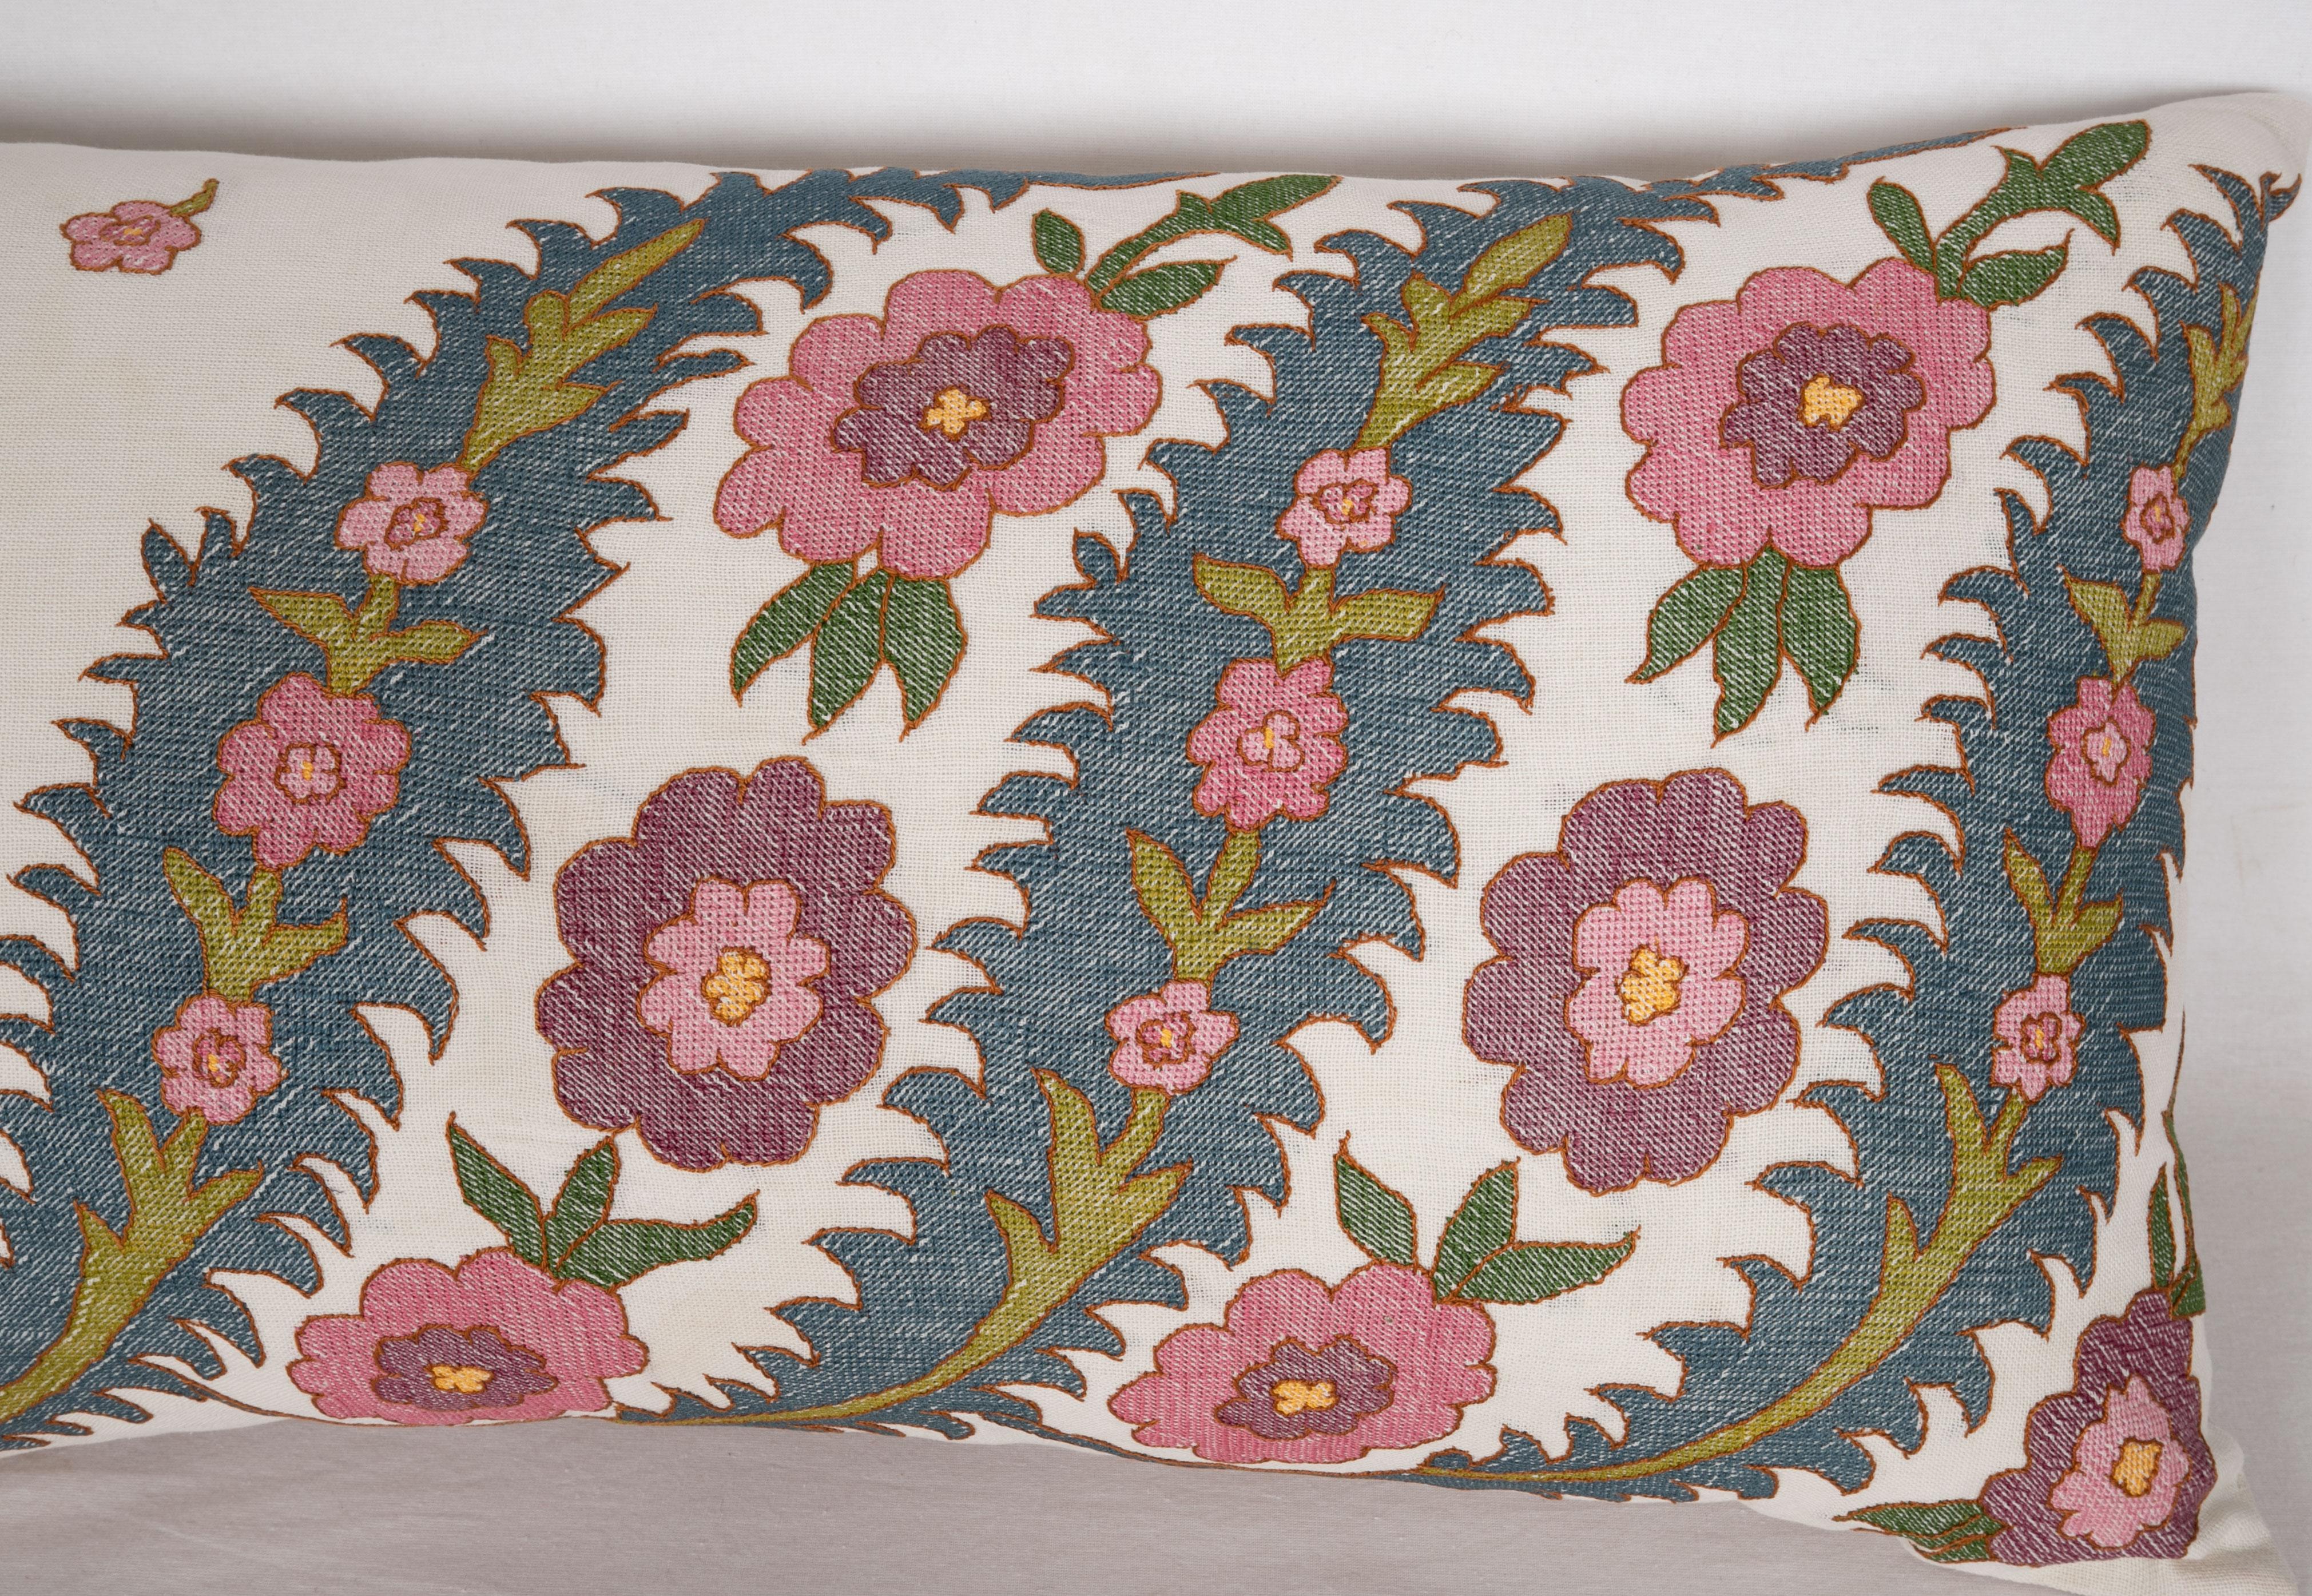 Suzani Antique Pillow Case Fashioned from an Eastern European Embroidery